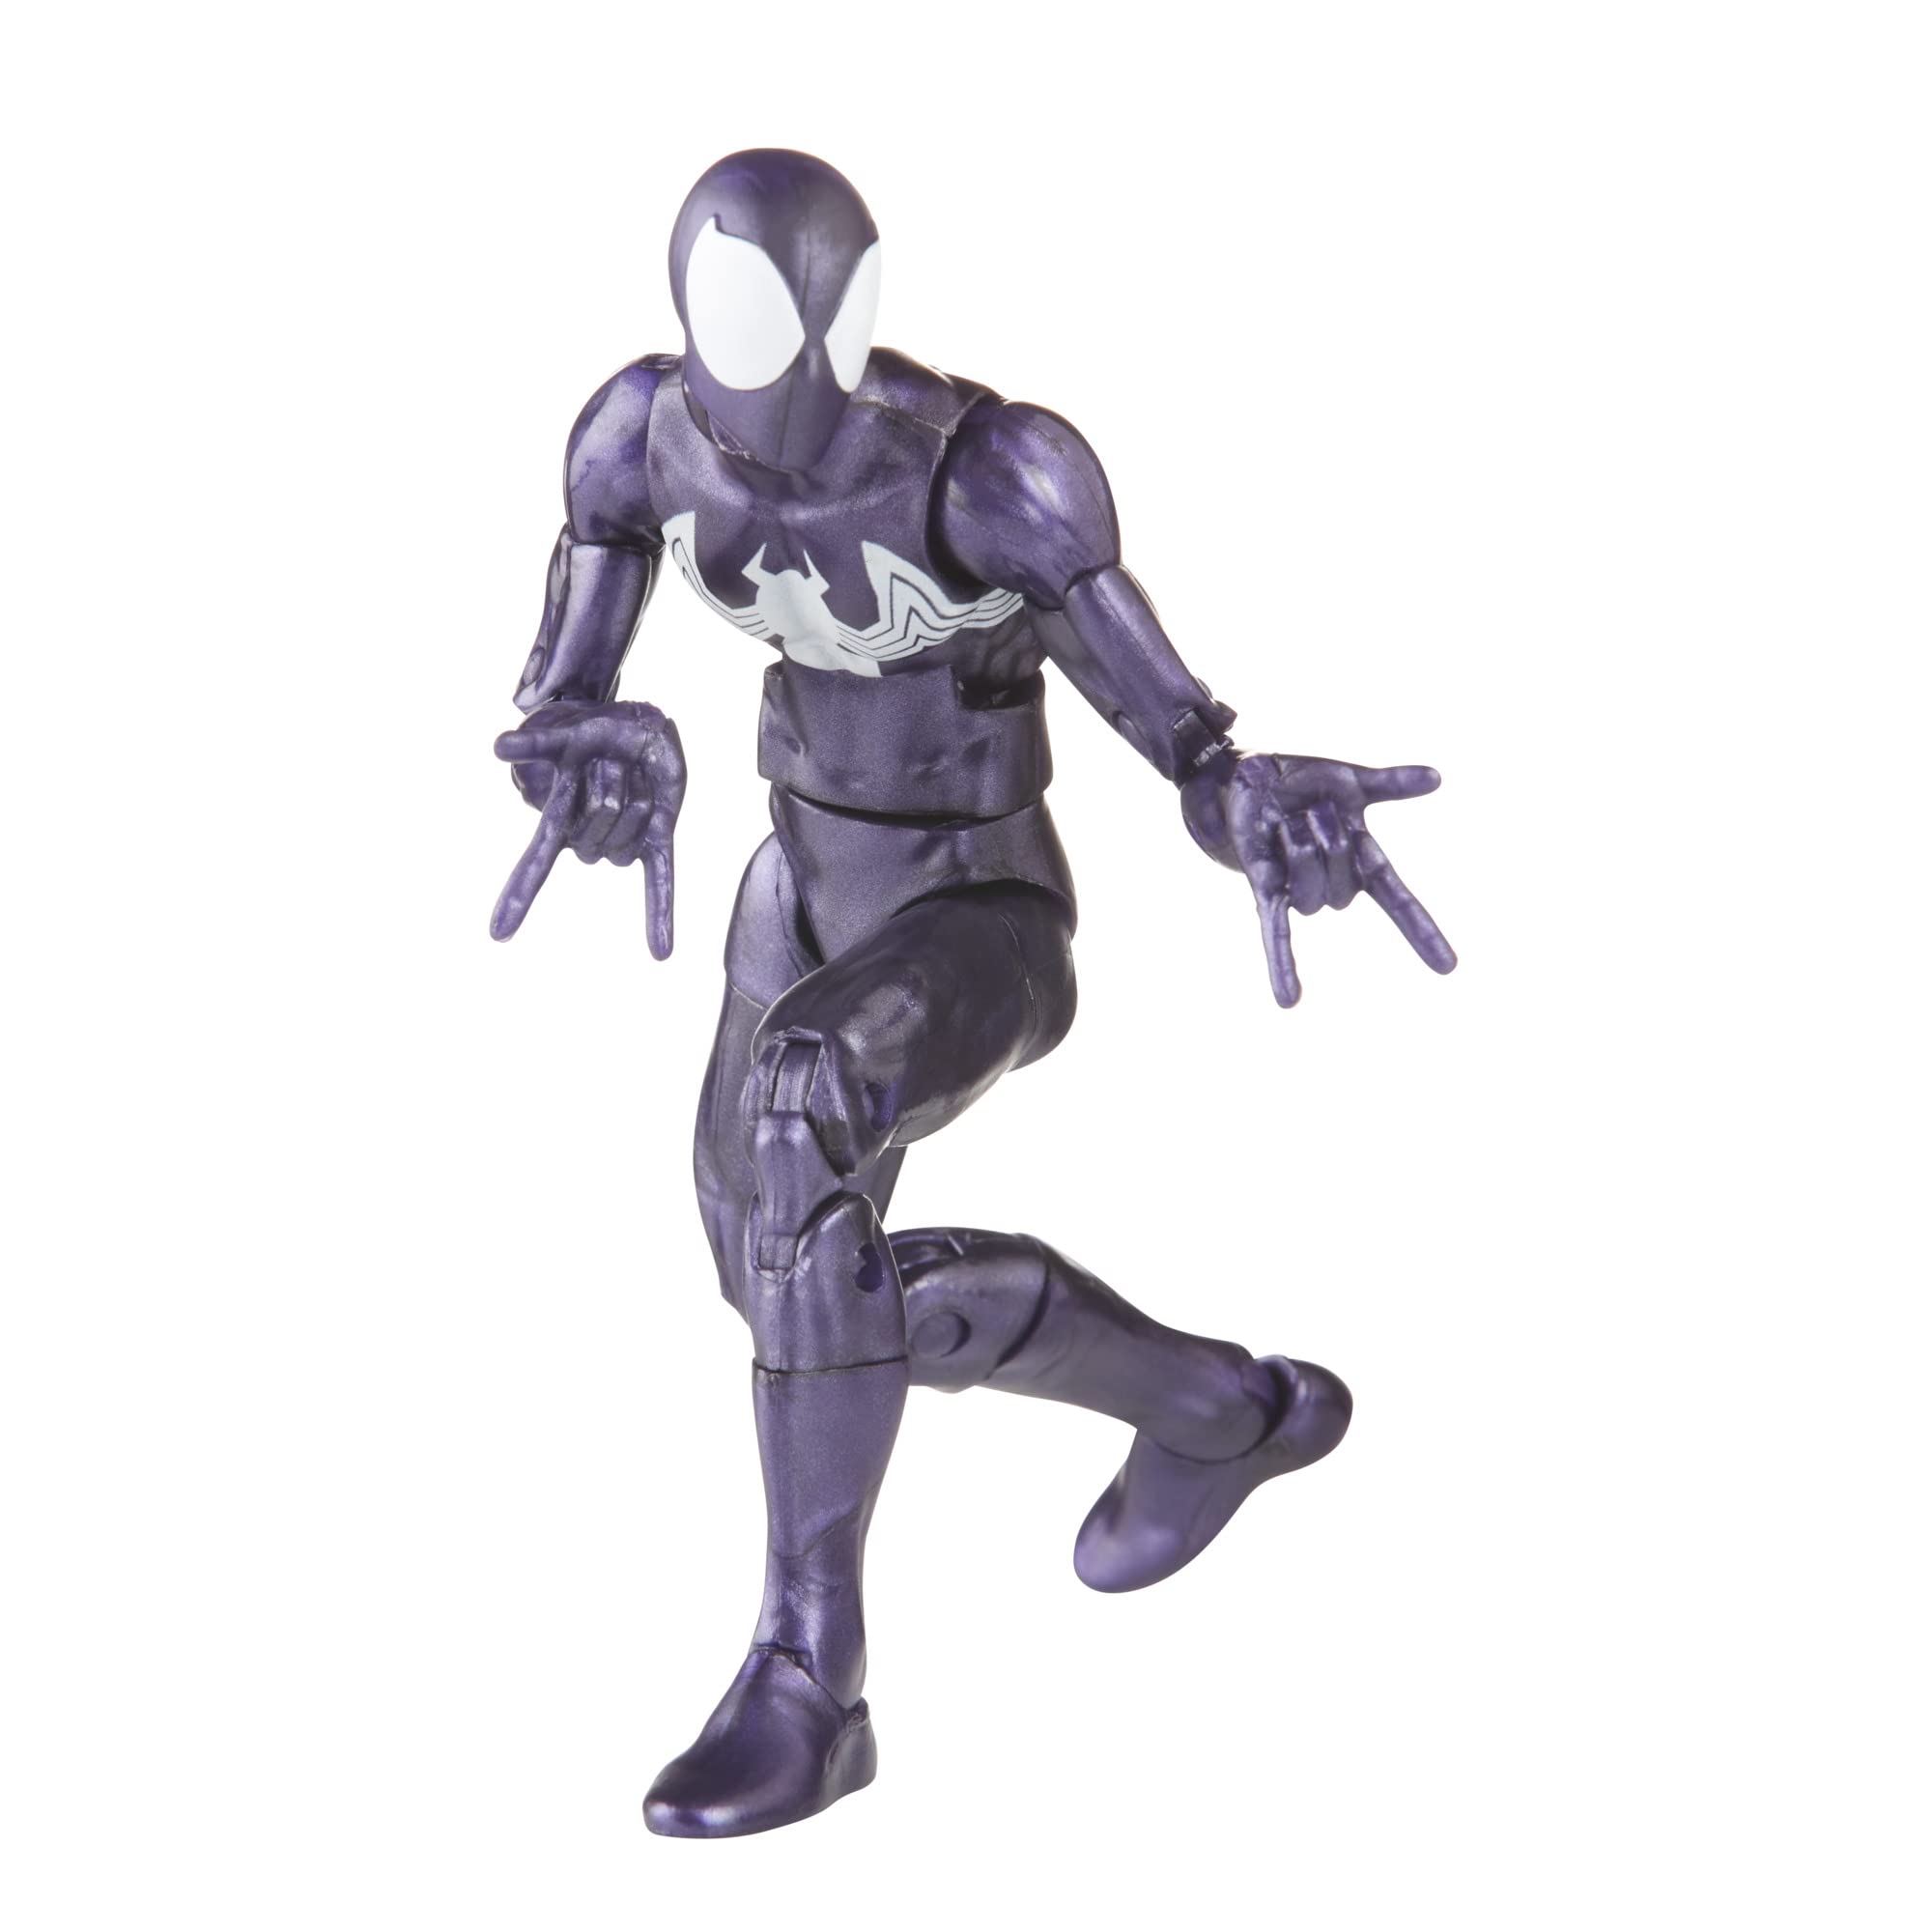 Marvel Legends Series Spider-Man Multipack, 6-Inch-Scale Collectible Action Figures with 14 Accessories, Toys for Kids Ages 4 and Up (Amazon Exclusive)